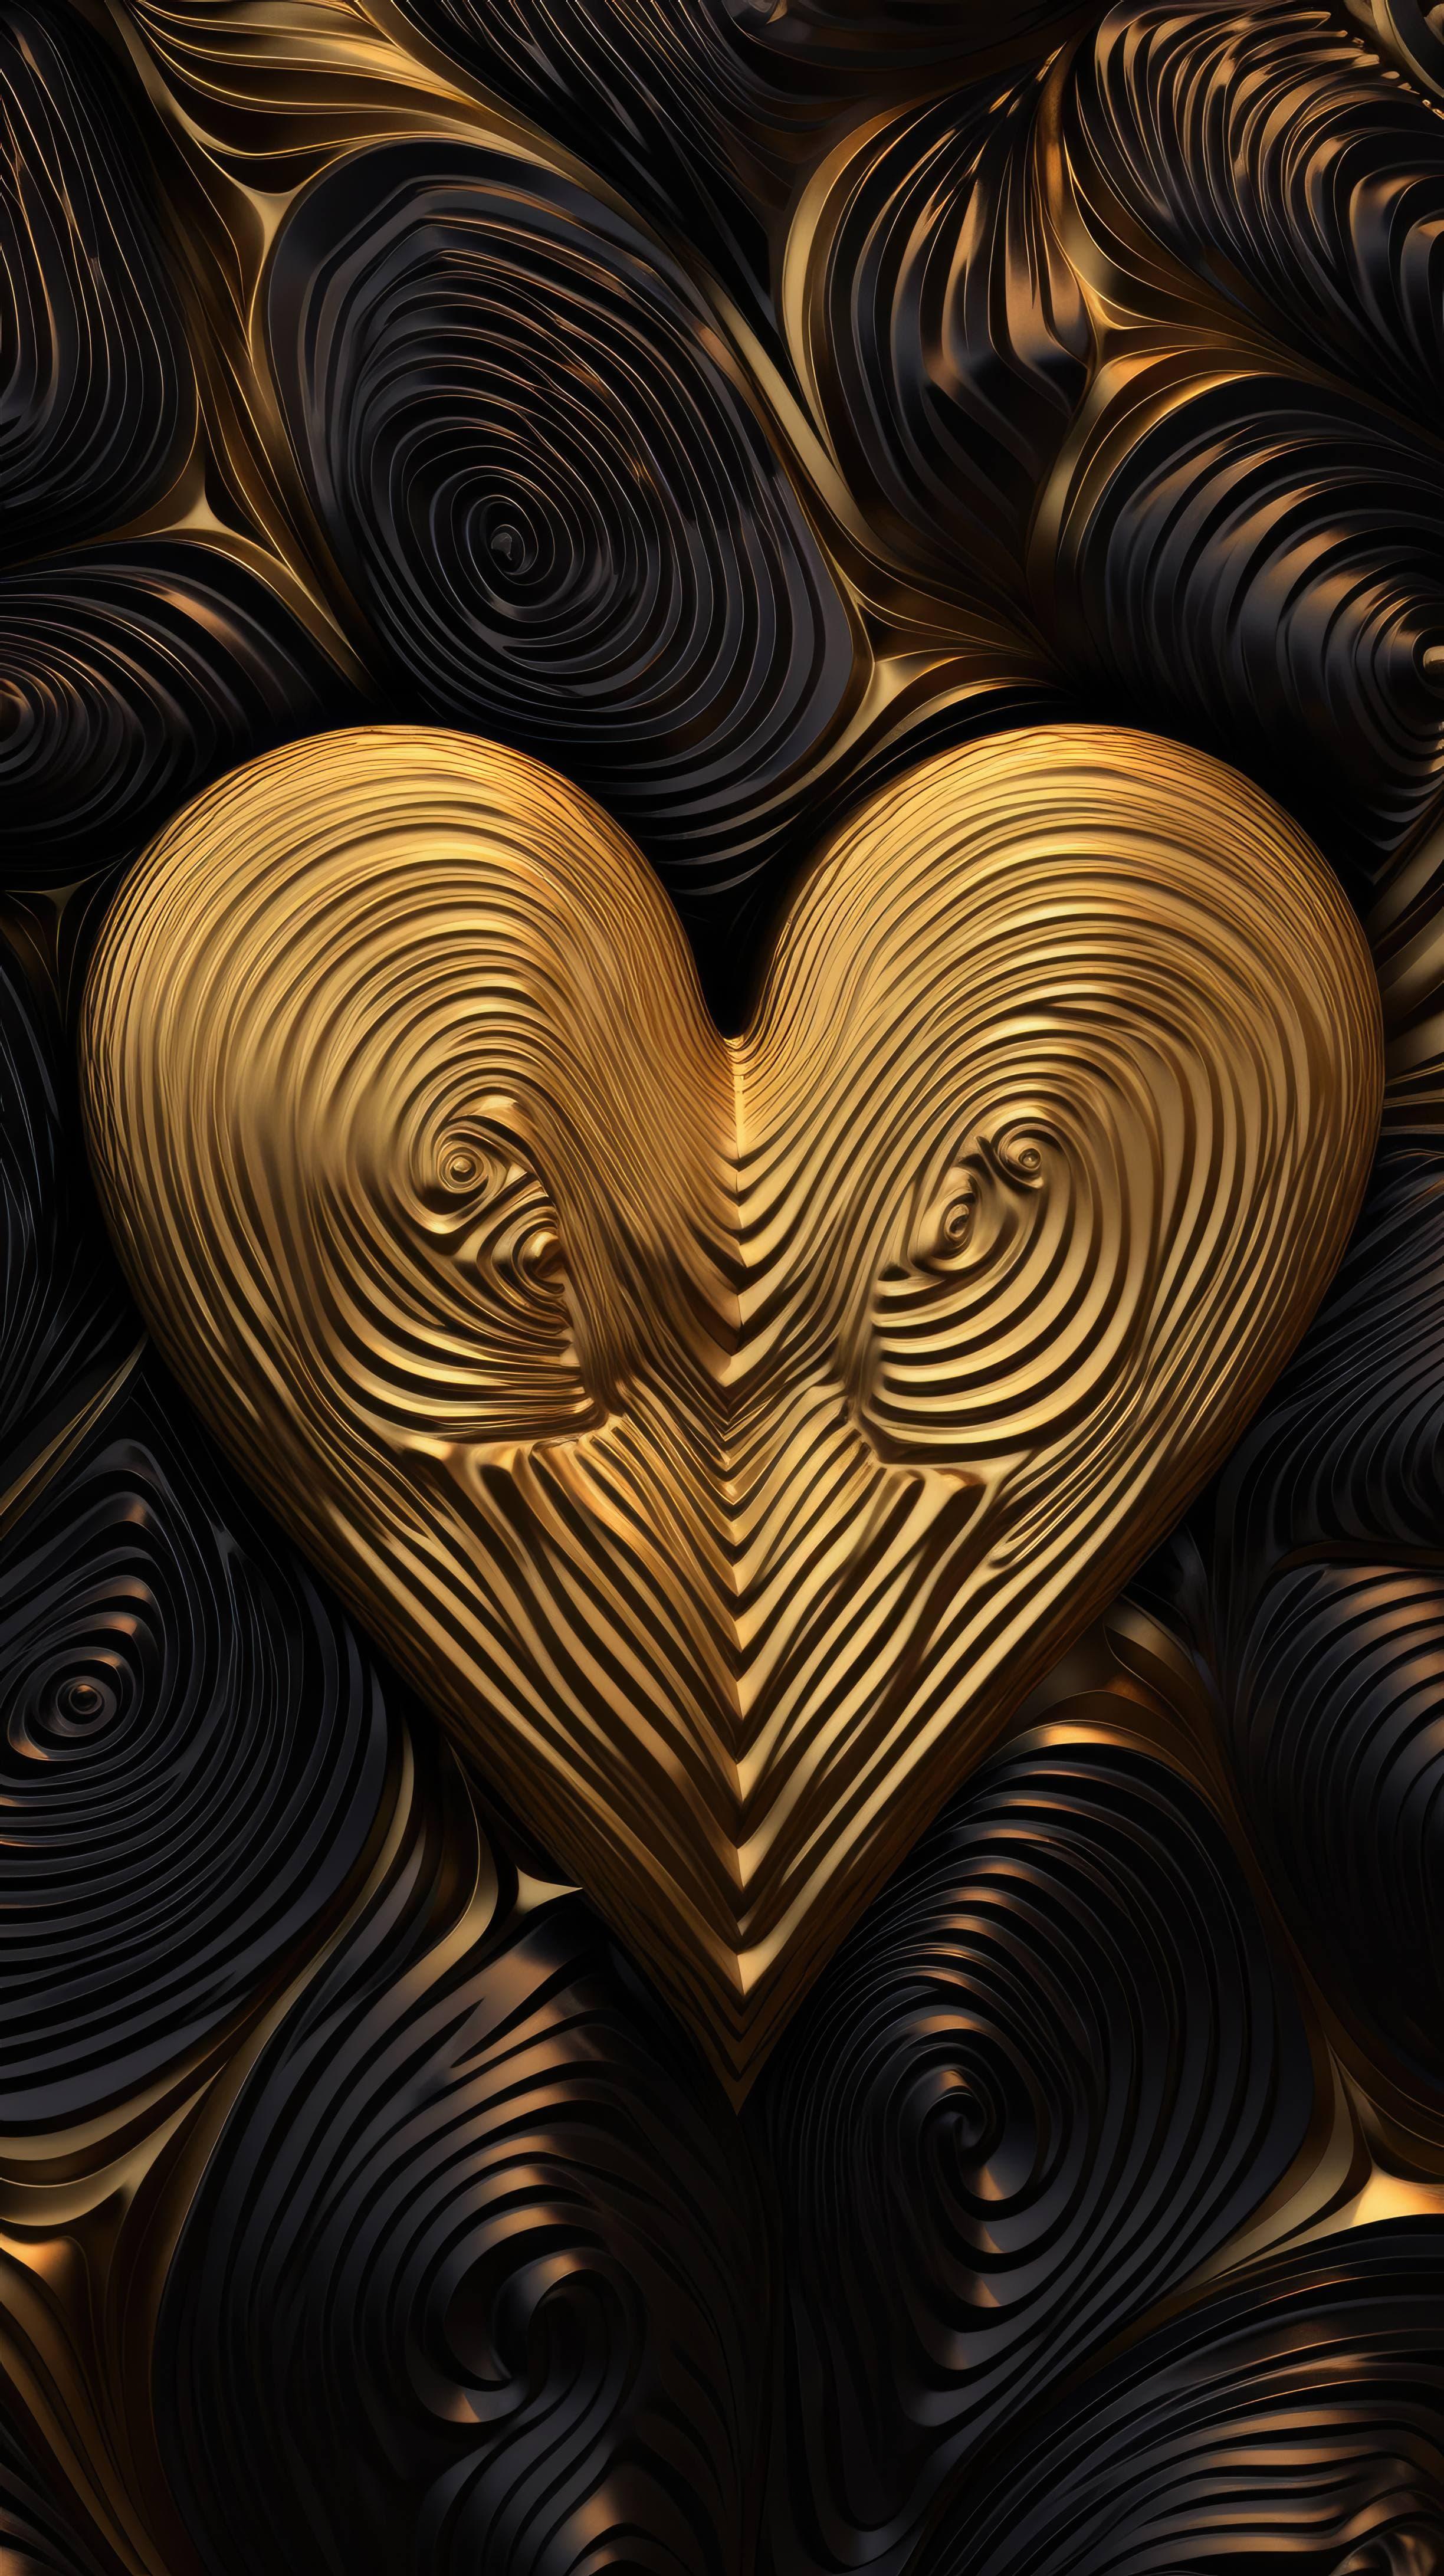 A 4K ultra HD mobile wallpaper with an abstract heart shaped